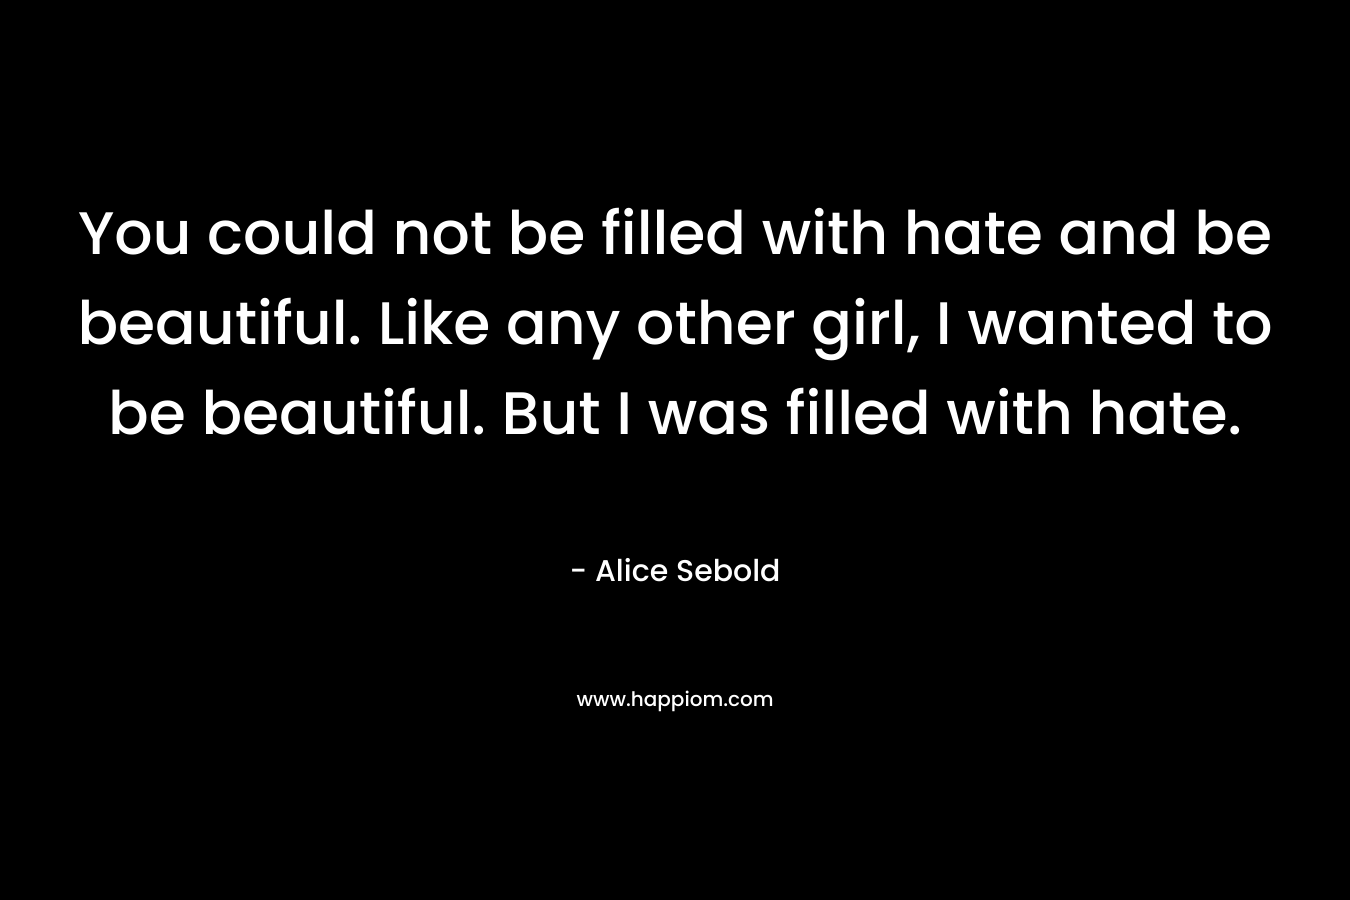 You could not be filled with hate and be beautiful. Like any other girl, I wanted to be beautiful. But I was filled with hate.